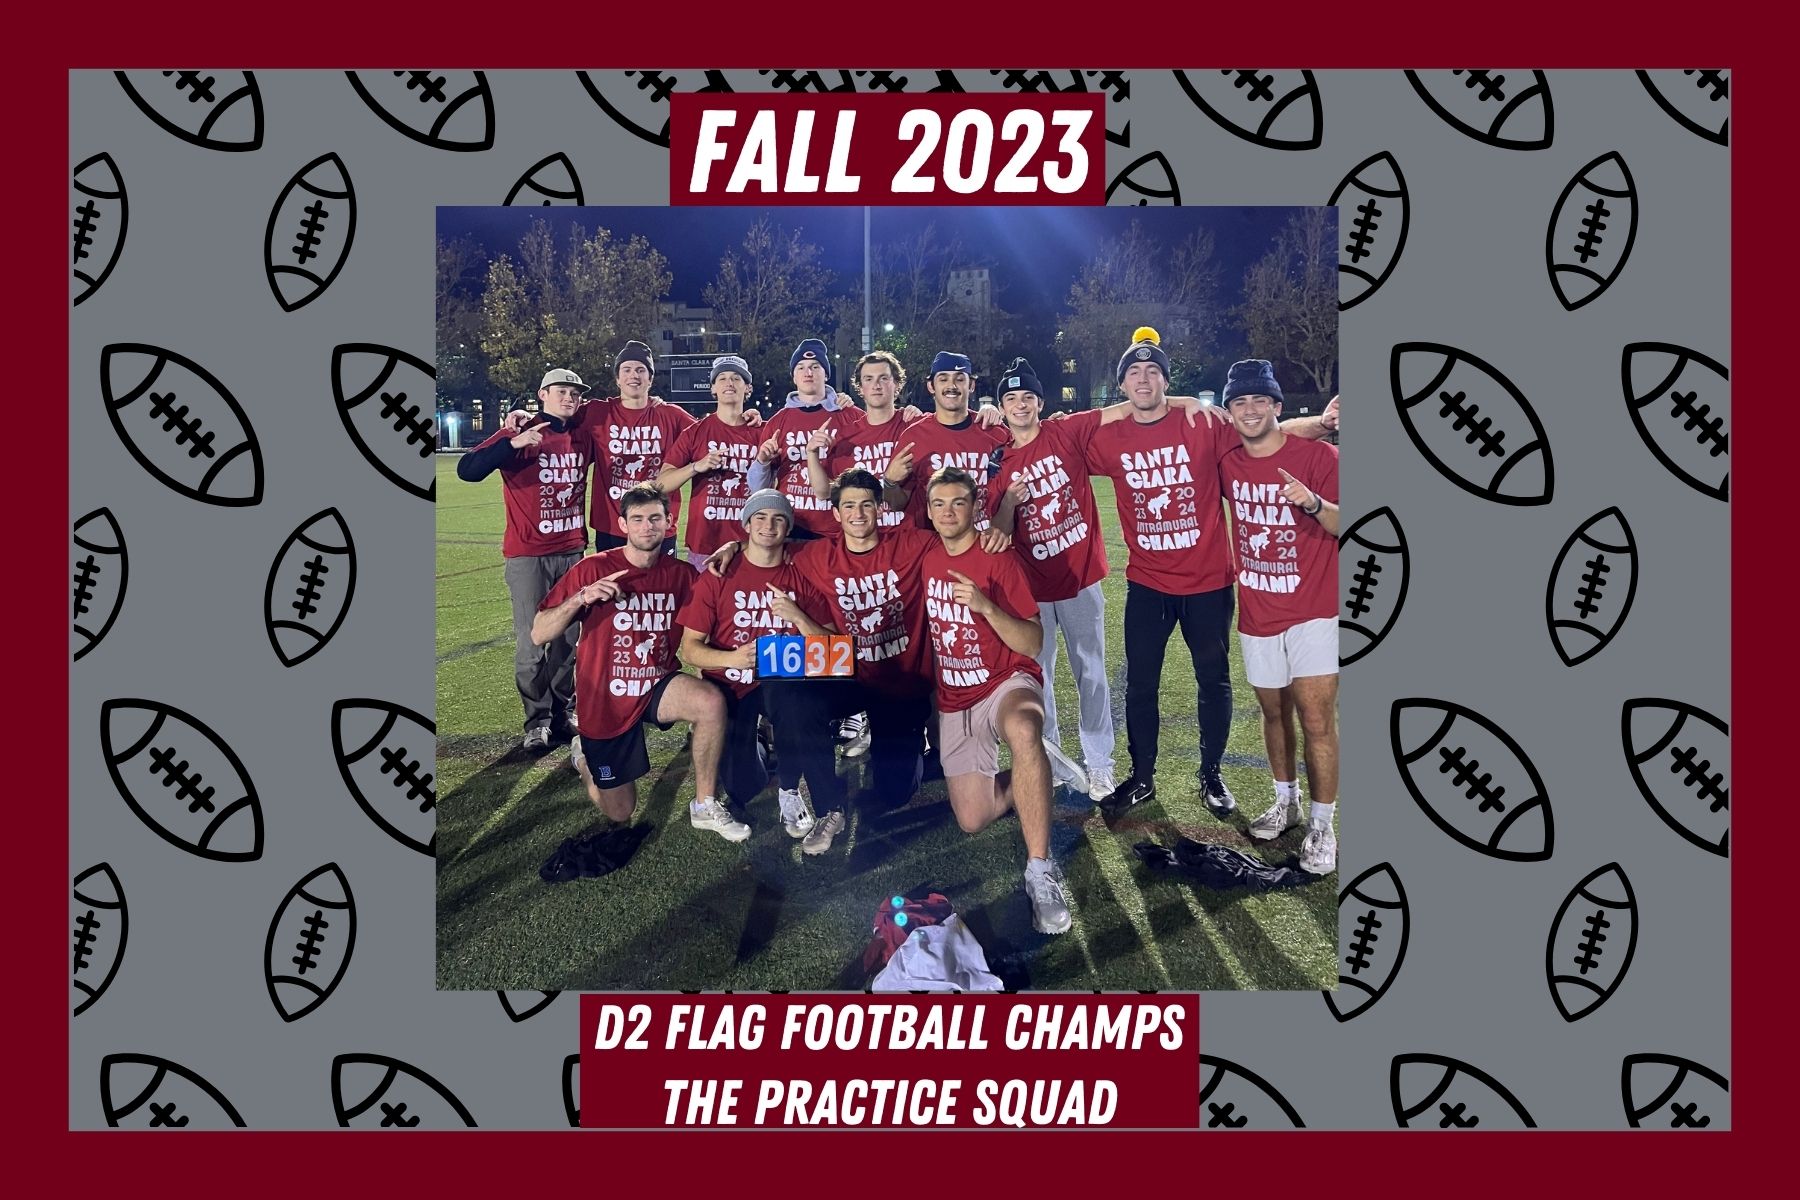 Photo of D2 flag football champions, The Practice Squad, posing for a photo wearing their IM Champ t shirts and holding the scoreboard displaying the final score, 32-16, from their win.